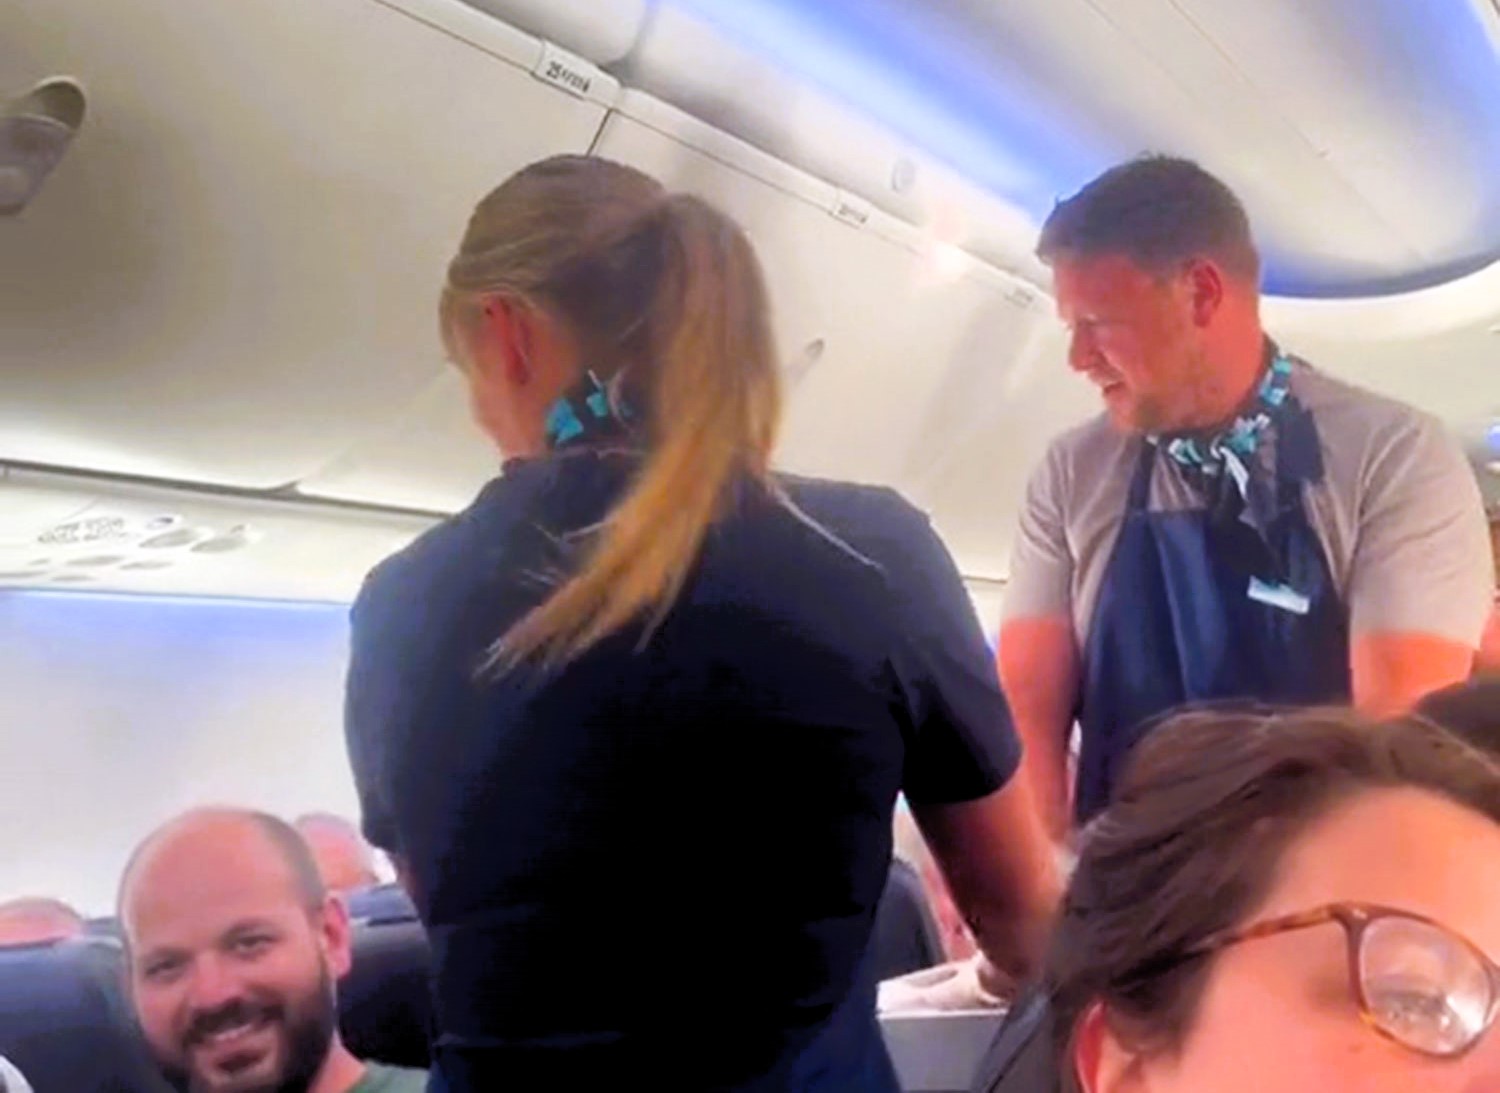 Plane passenger hilariously helps cabin crew collect rubbish mid-flight after going to the loo, Olivia Power shares the viral moment on TikTok, garnering over 24 million views.